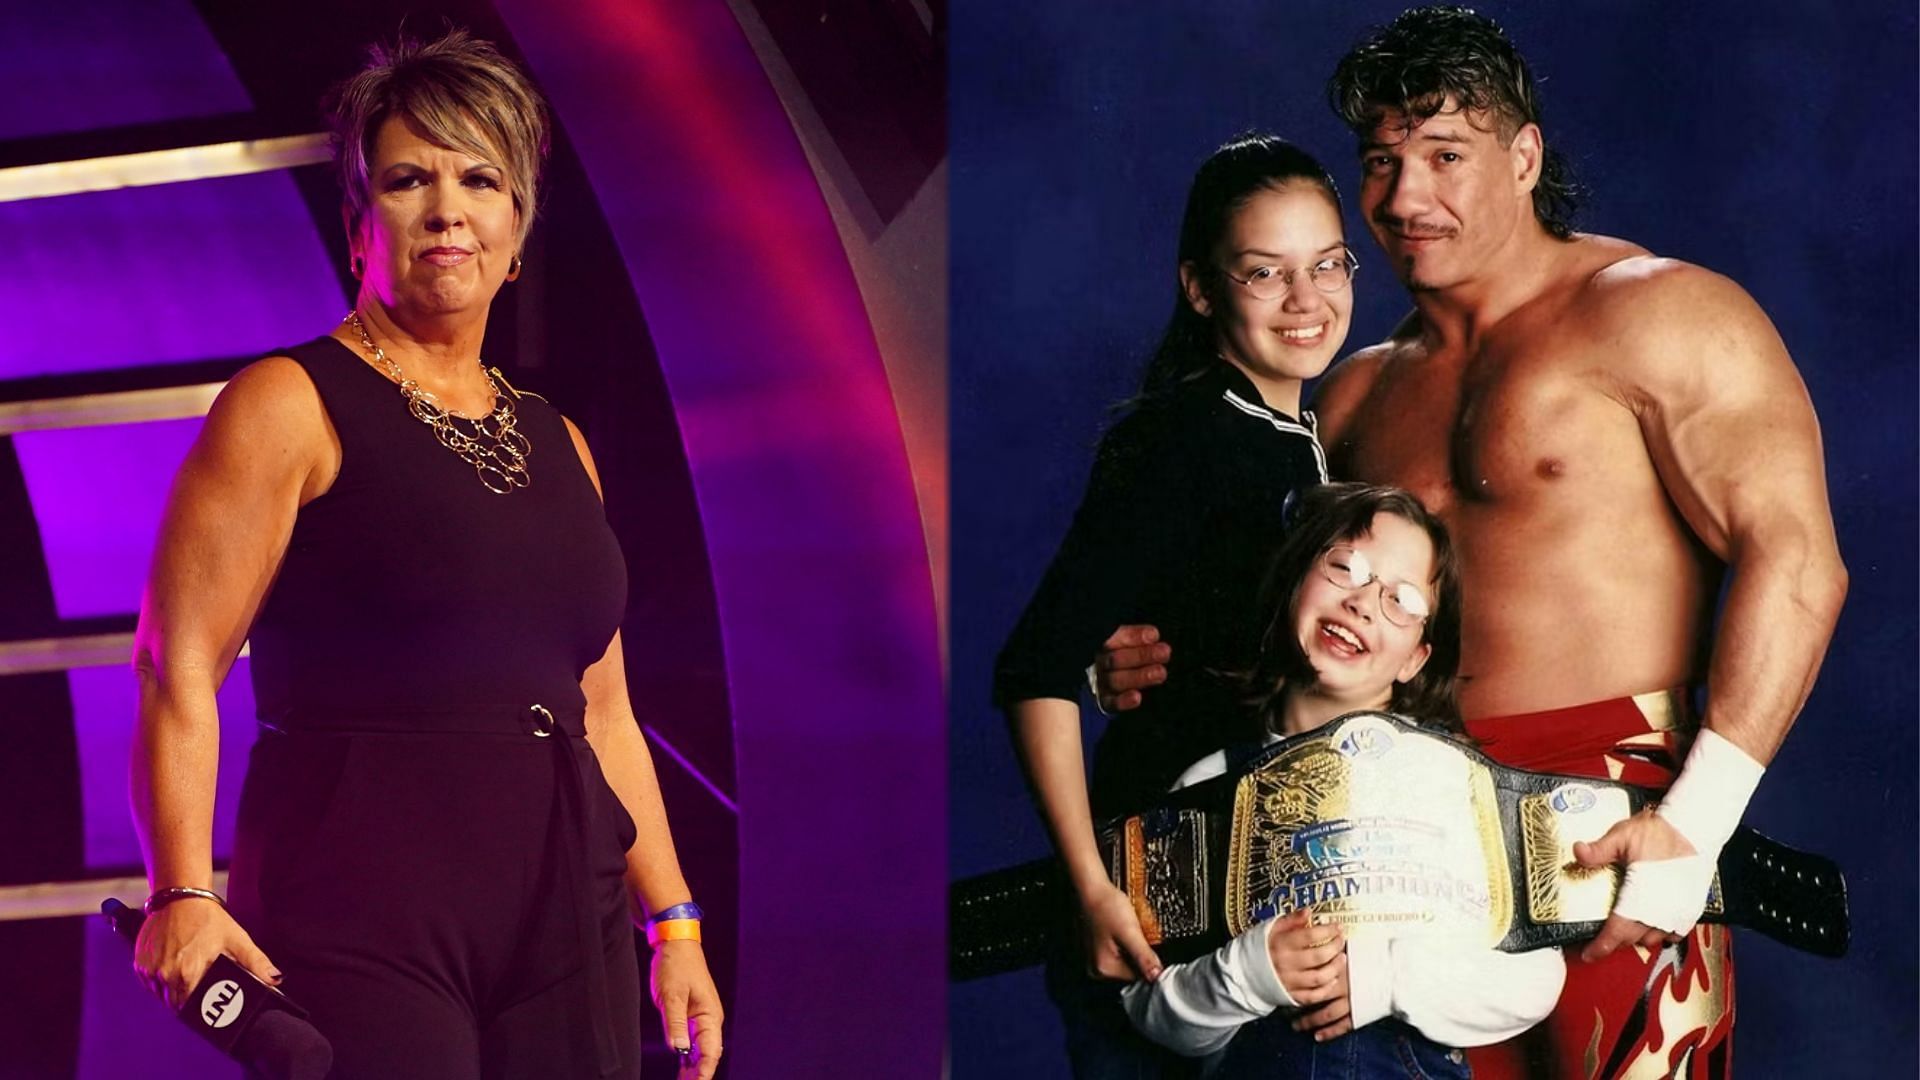 Vickie Guerrero had some harsh words in response to the allegations.